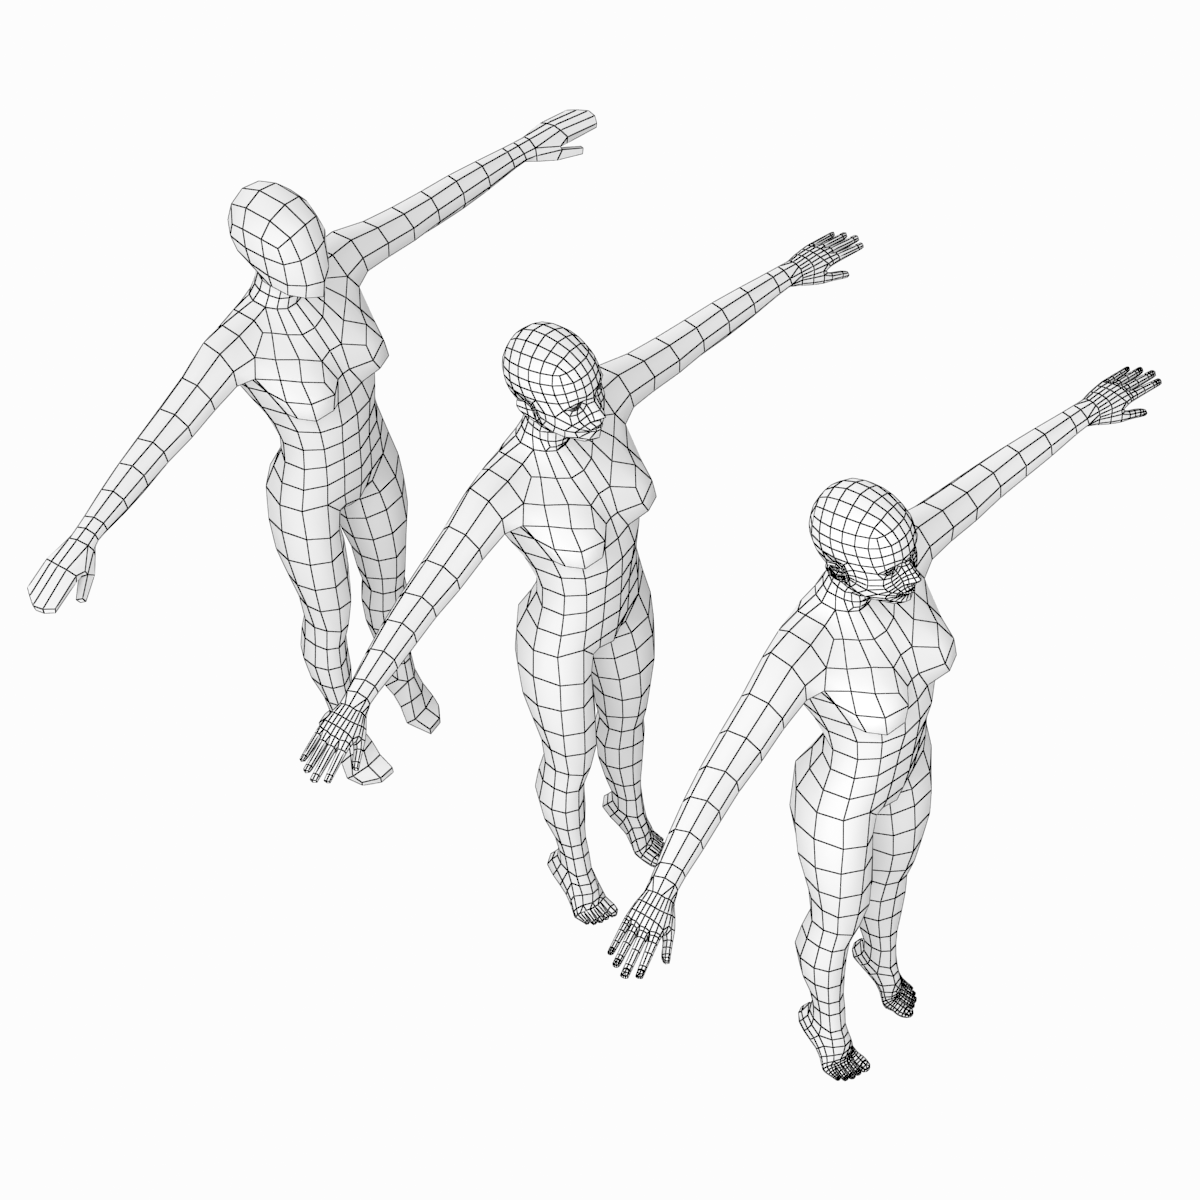 Natural Female and Male in T-Pose Base Mesh 3D Model in Woman 3DExport